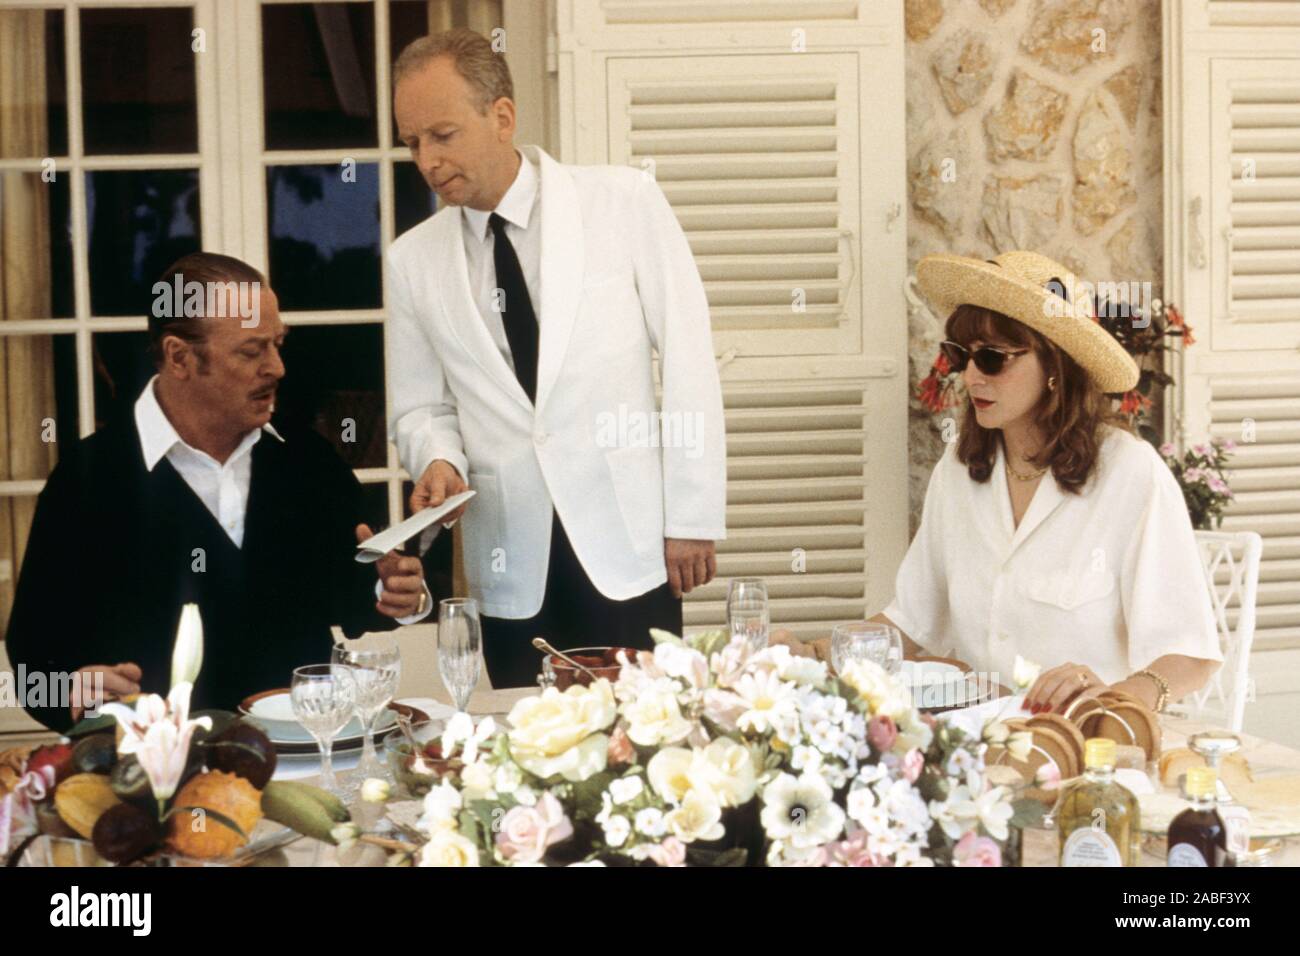 DIRTY ROTTEN SCOUNDRELS, from left: Michael Caine, Ian McDiarmid, Glenne Headly, 1988, © Orion/courtesy Everett Collection Stock Photo